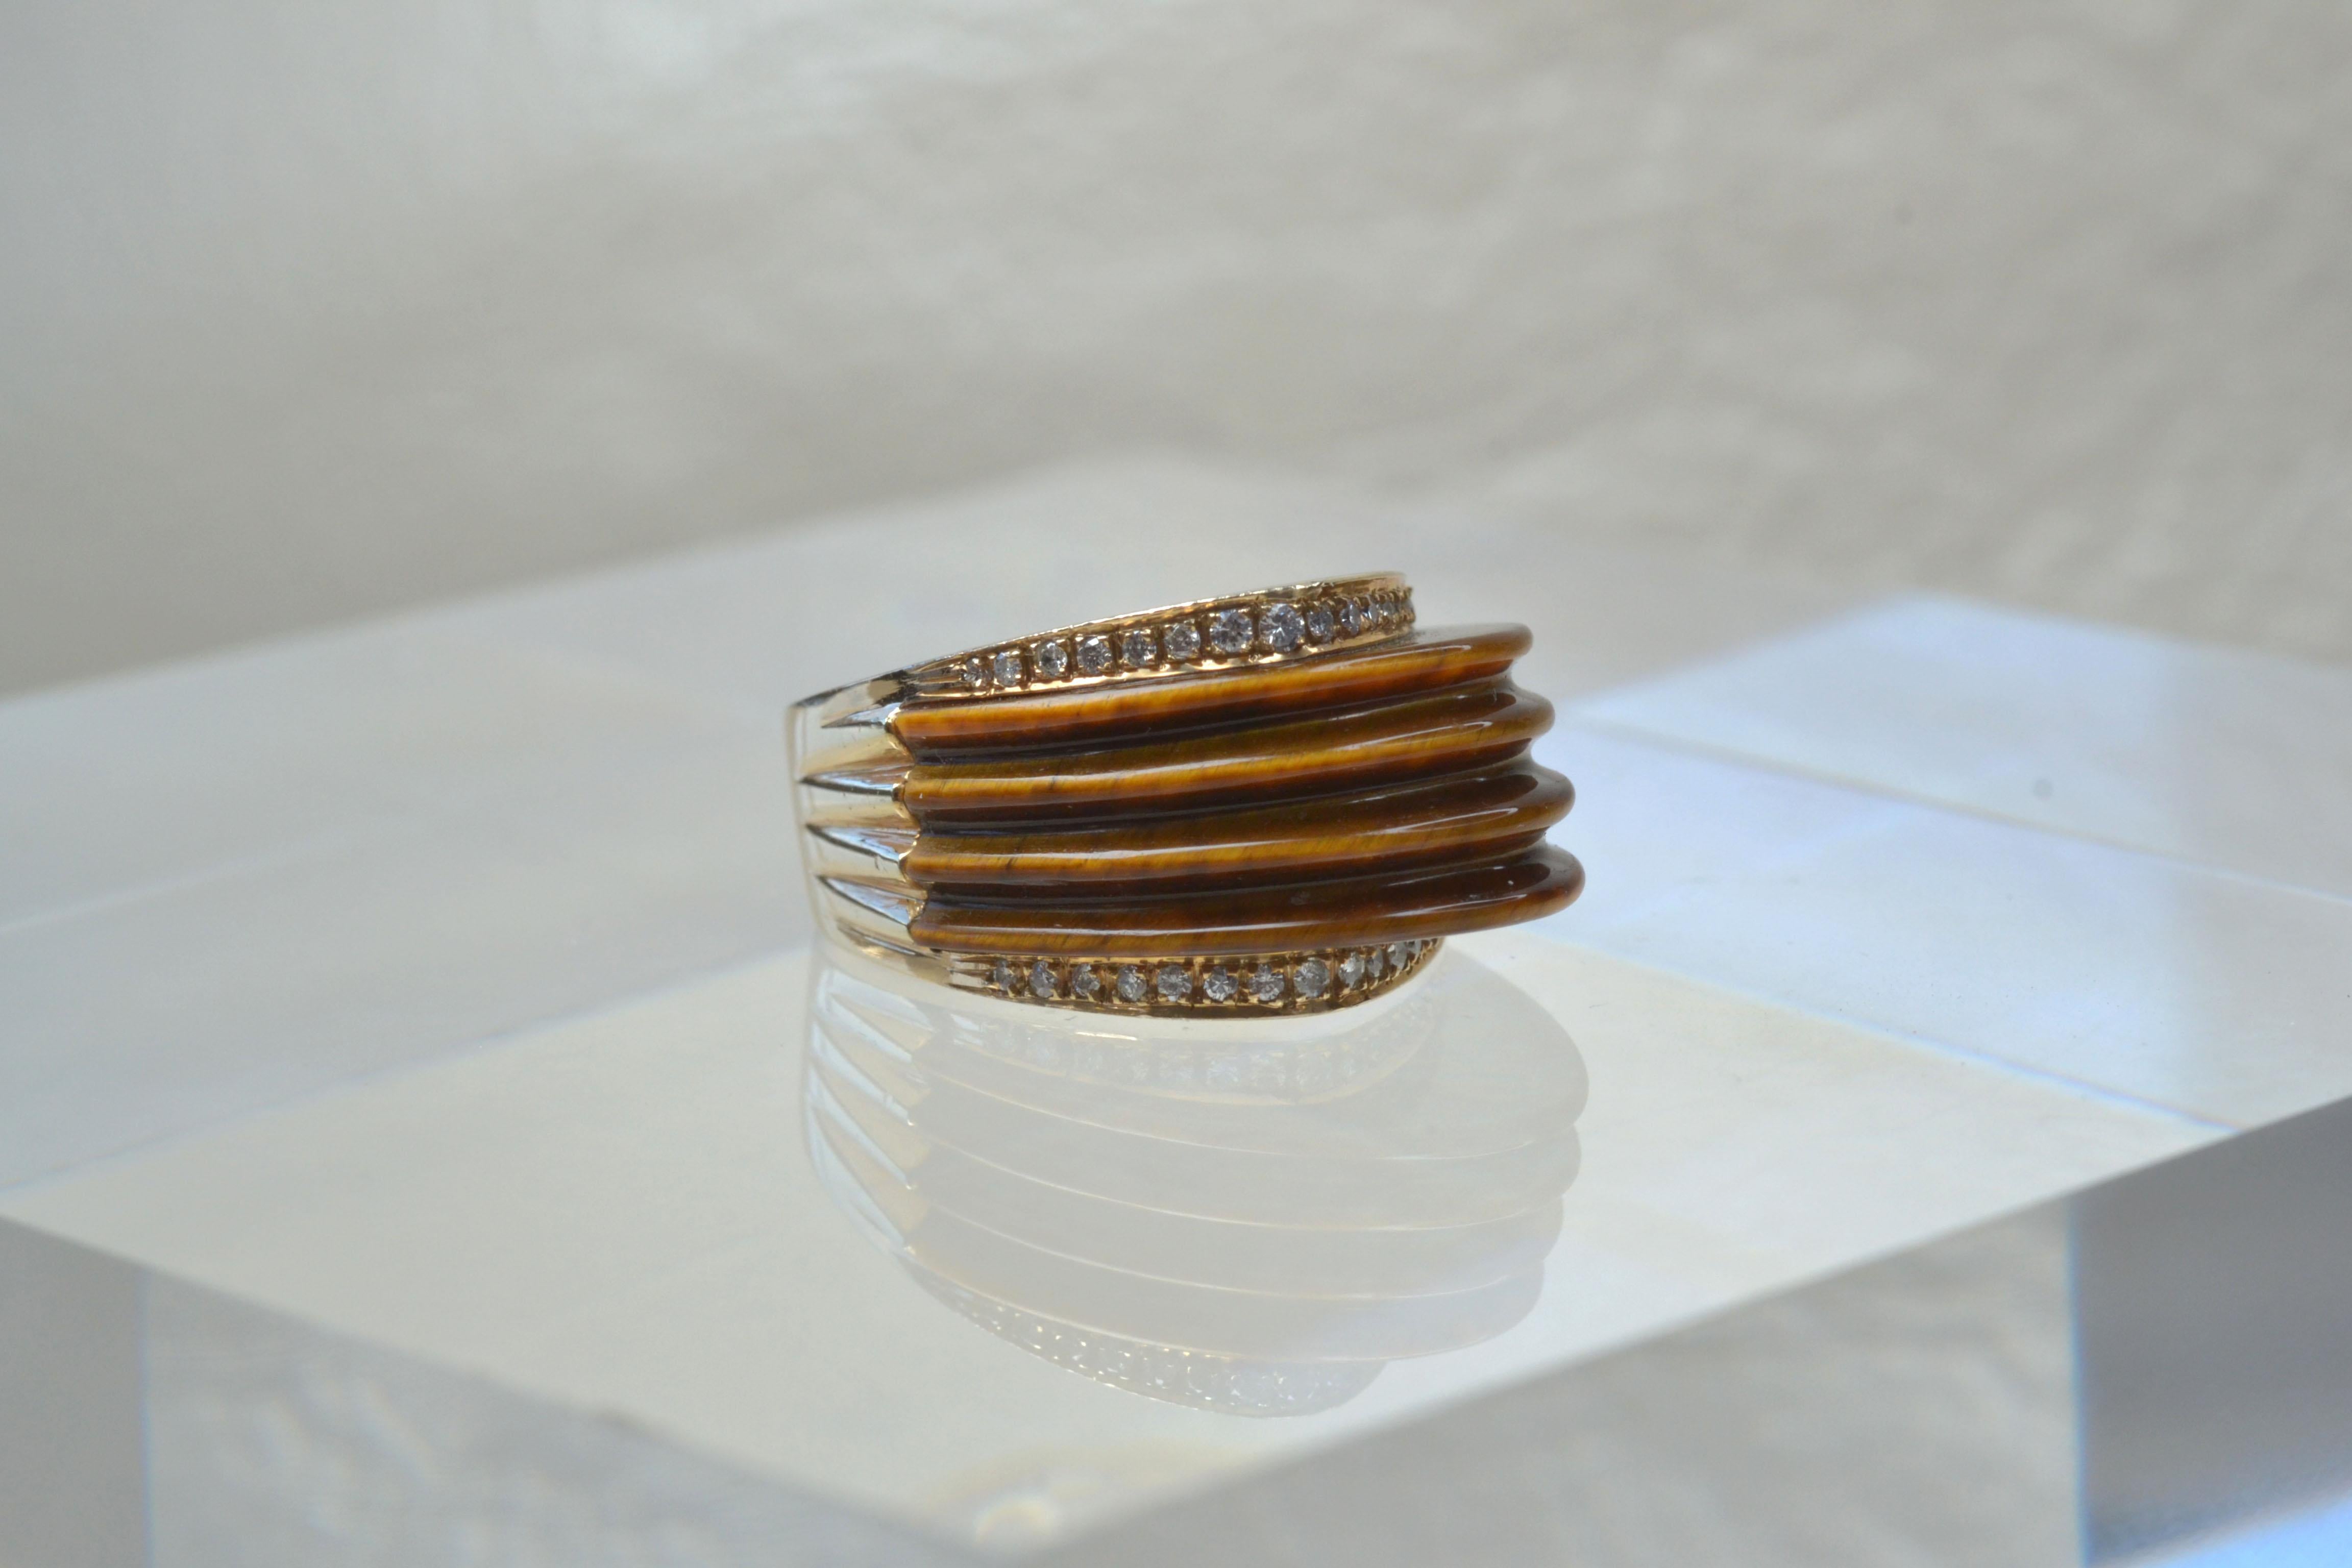 Retro Vintage 14k Gold Ridged Tiger's Eye and Diamond Ring, Limited Edition For Sale